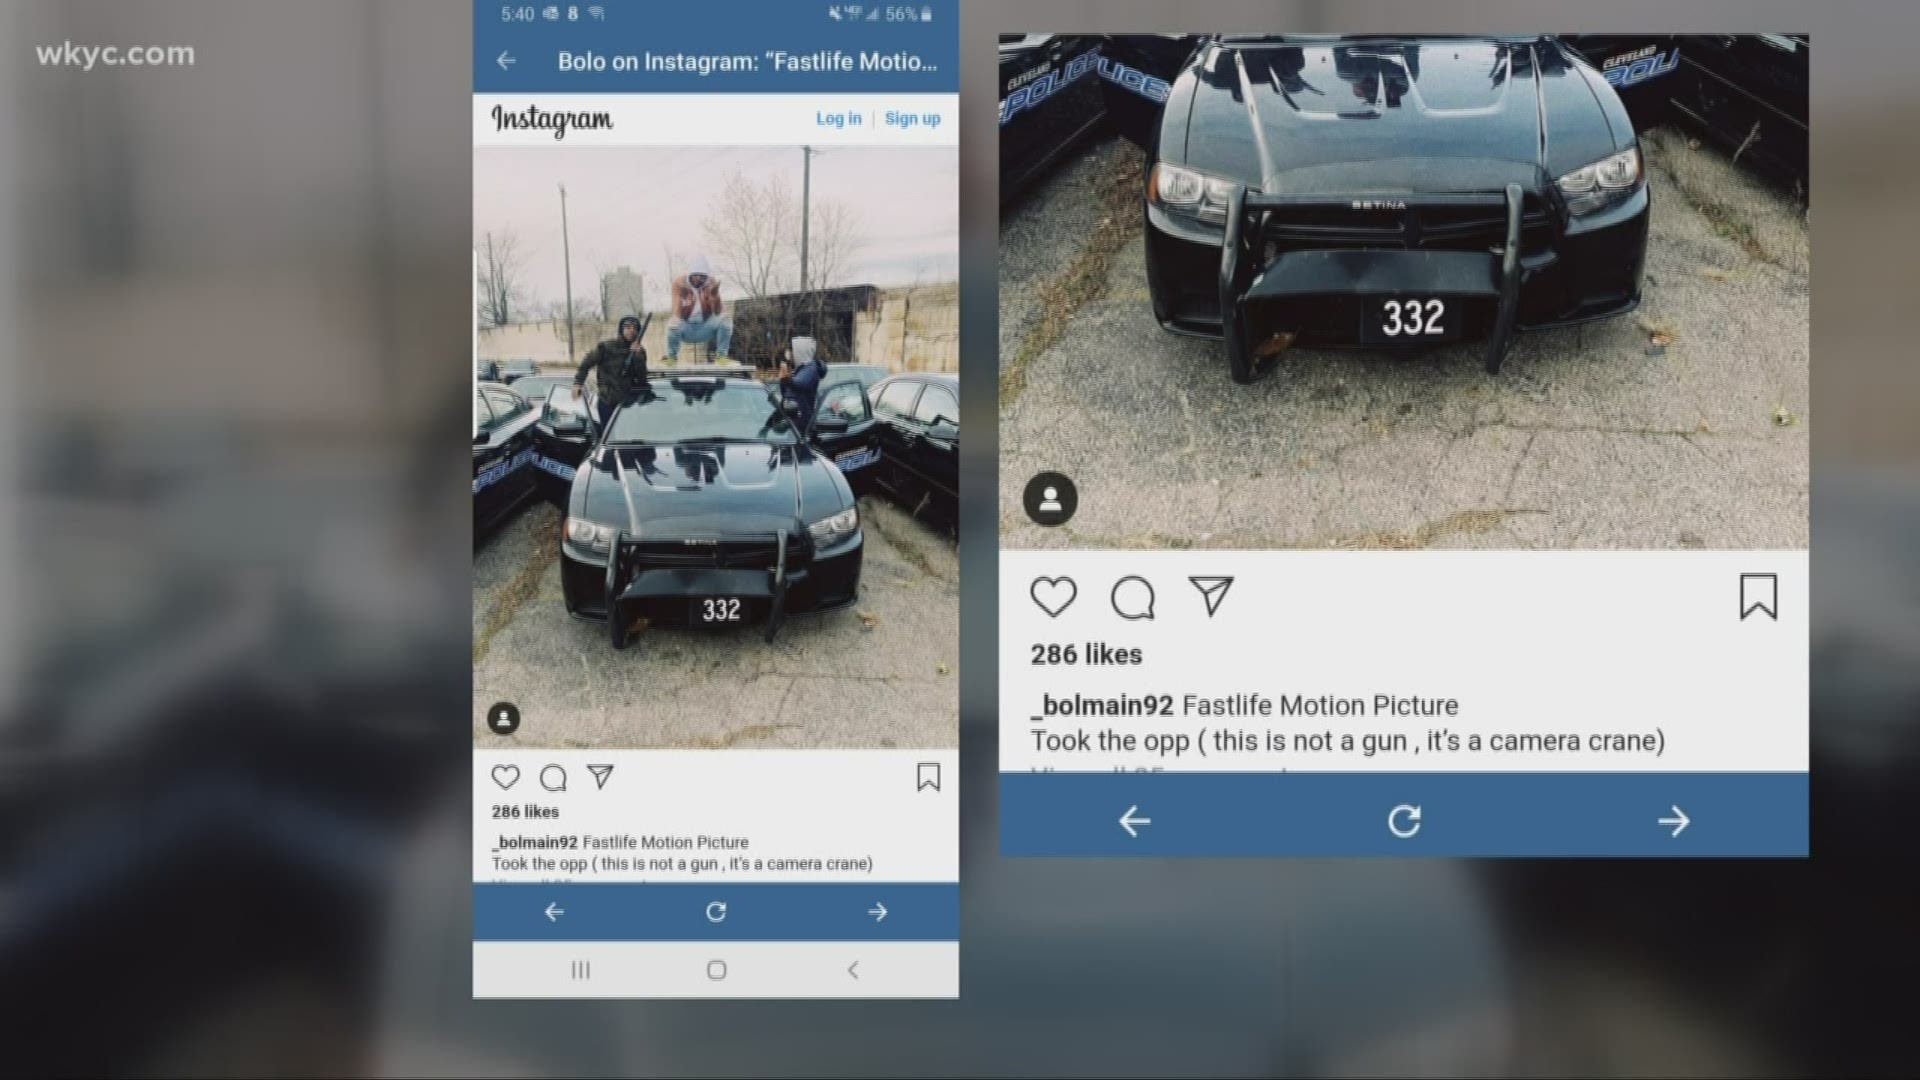 A photo showing three people standing on a Cleveland police cruiser while it was sitting unoccupied in a parking lot is real. Officials confirmed to 3News Tuesday.